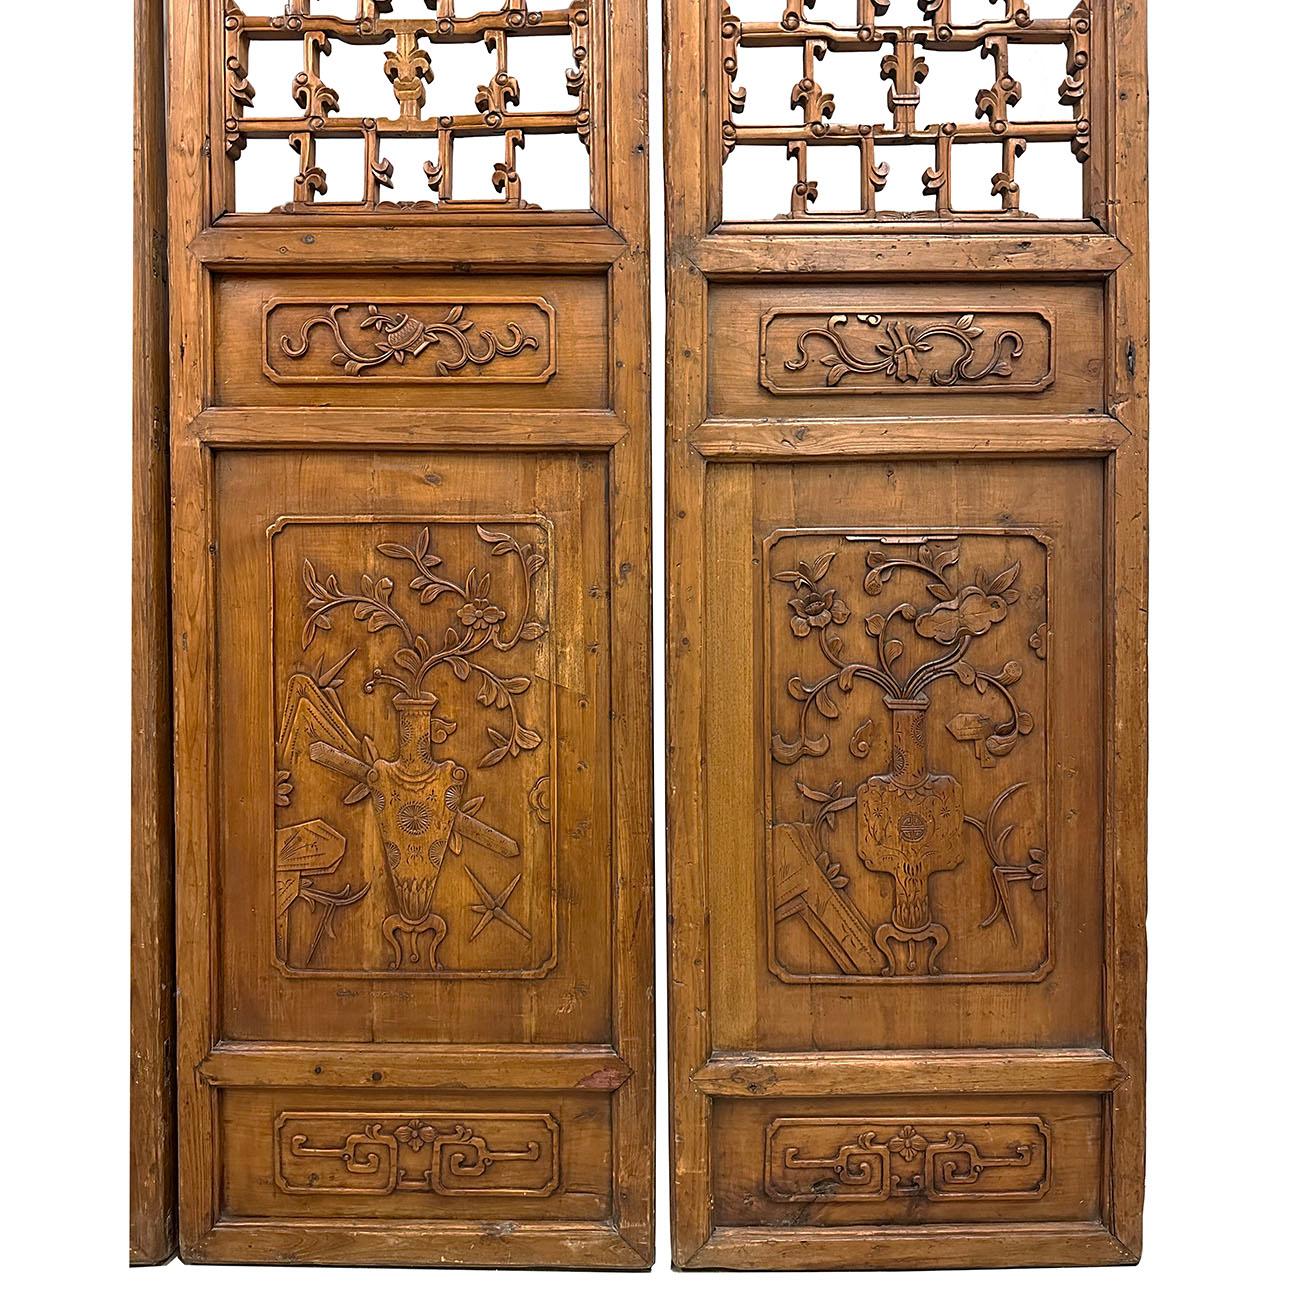 Late 19th Century Antique Chinese Hand Carved 6 Panels Wooden Screen/Room Divide 3